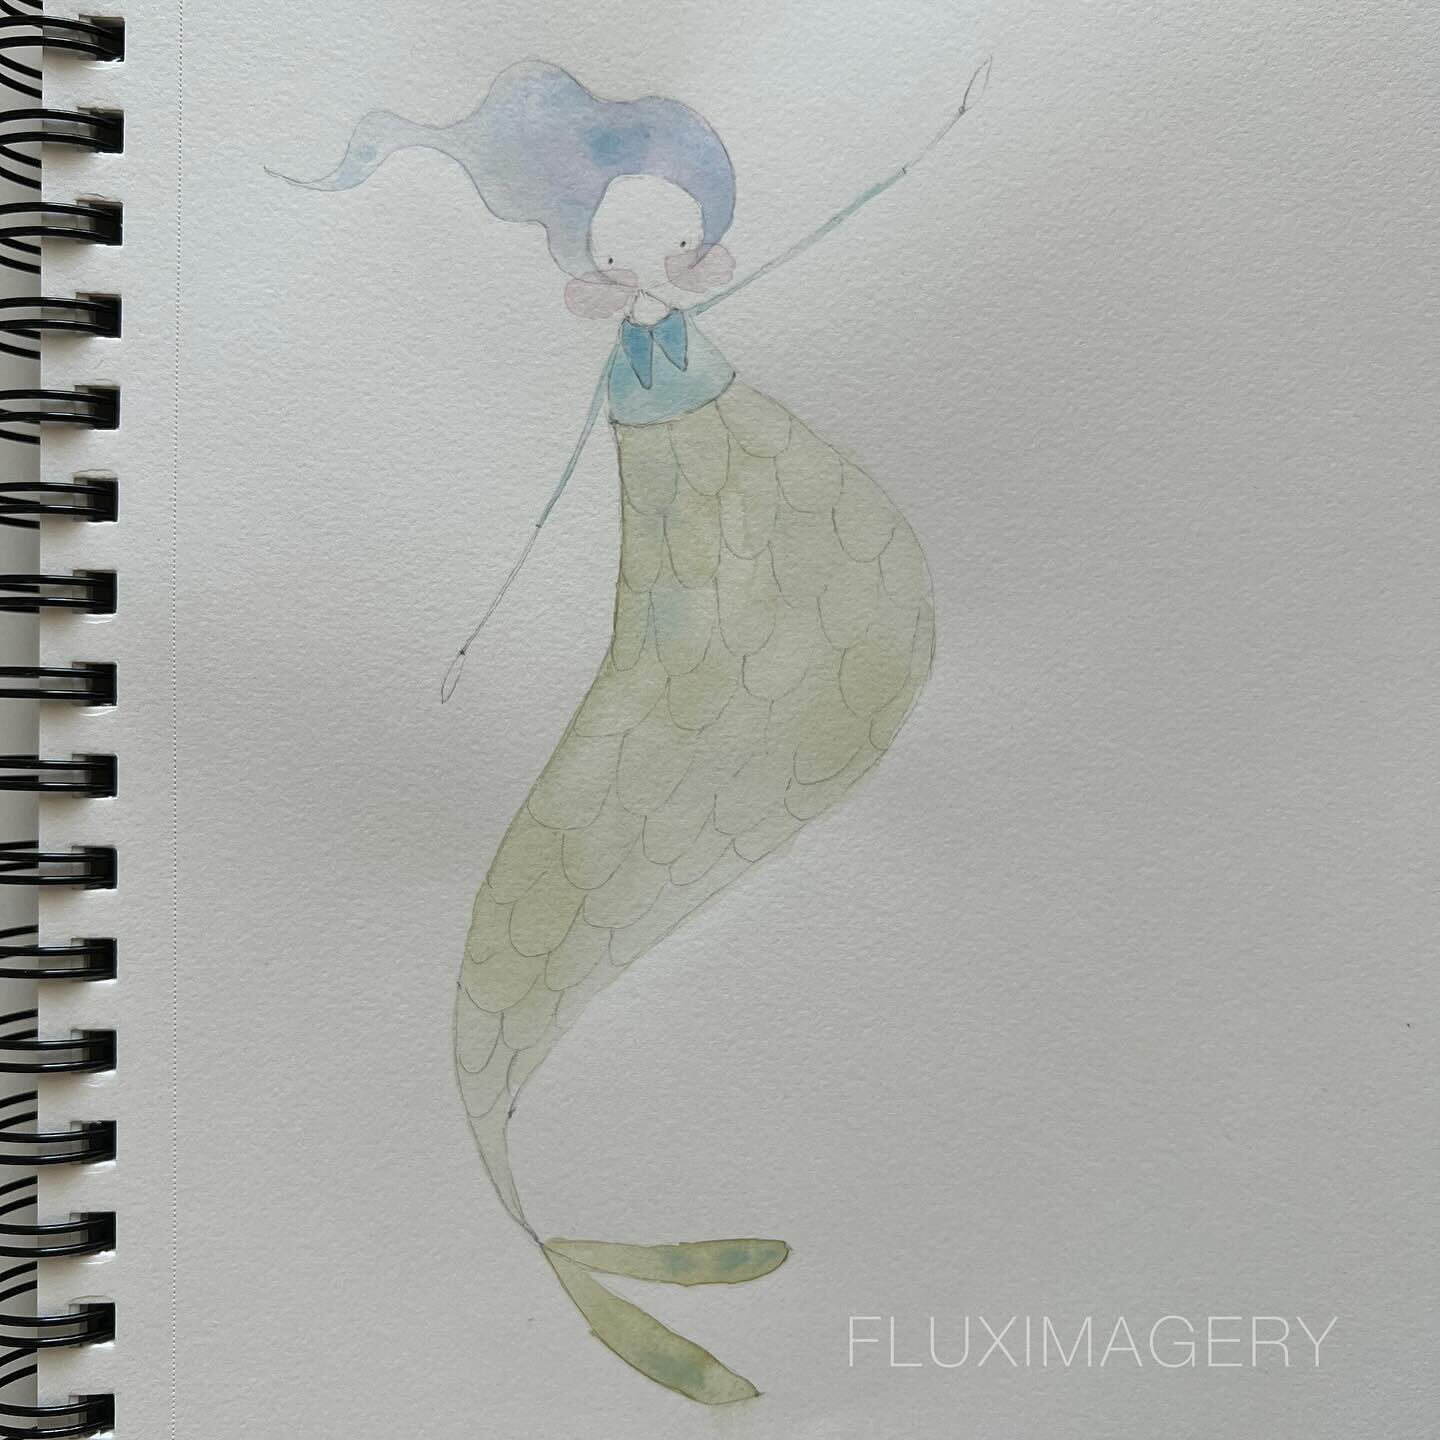 I&rsquo;ve been focusing on upping my financial literacy since last year and I&rsquo;m loving it. So many new book favorites. I have savings goals so I wanted a monthly tracker but wanted it to be cute and fun too! So I painted this mermaid and each 